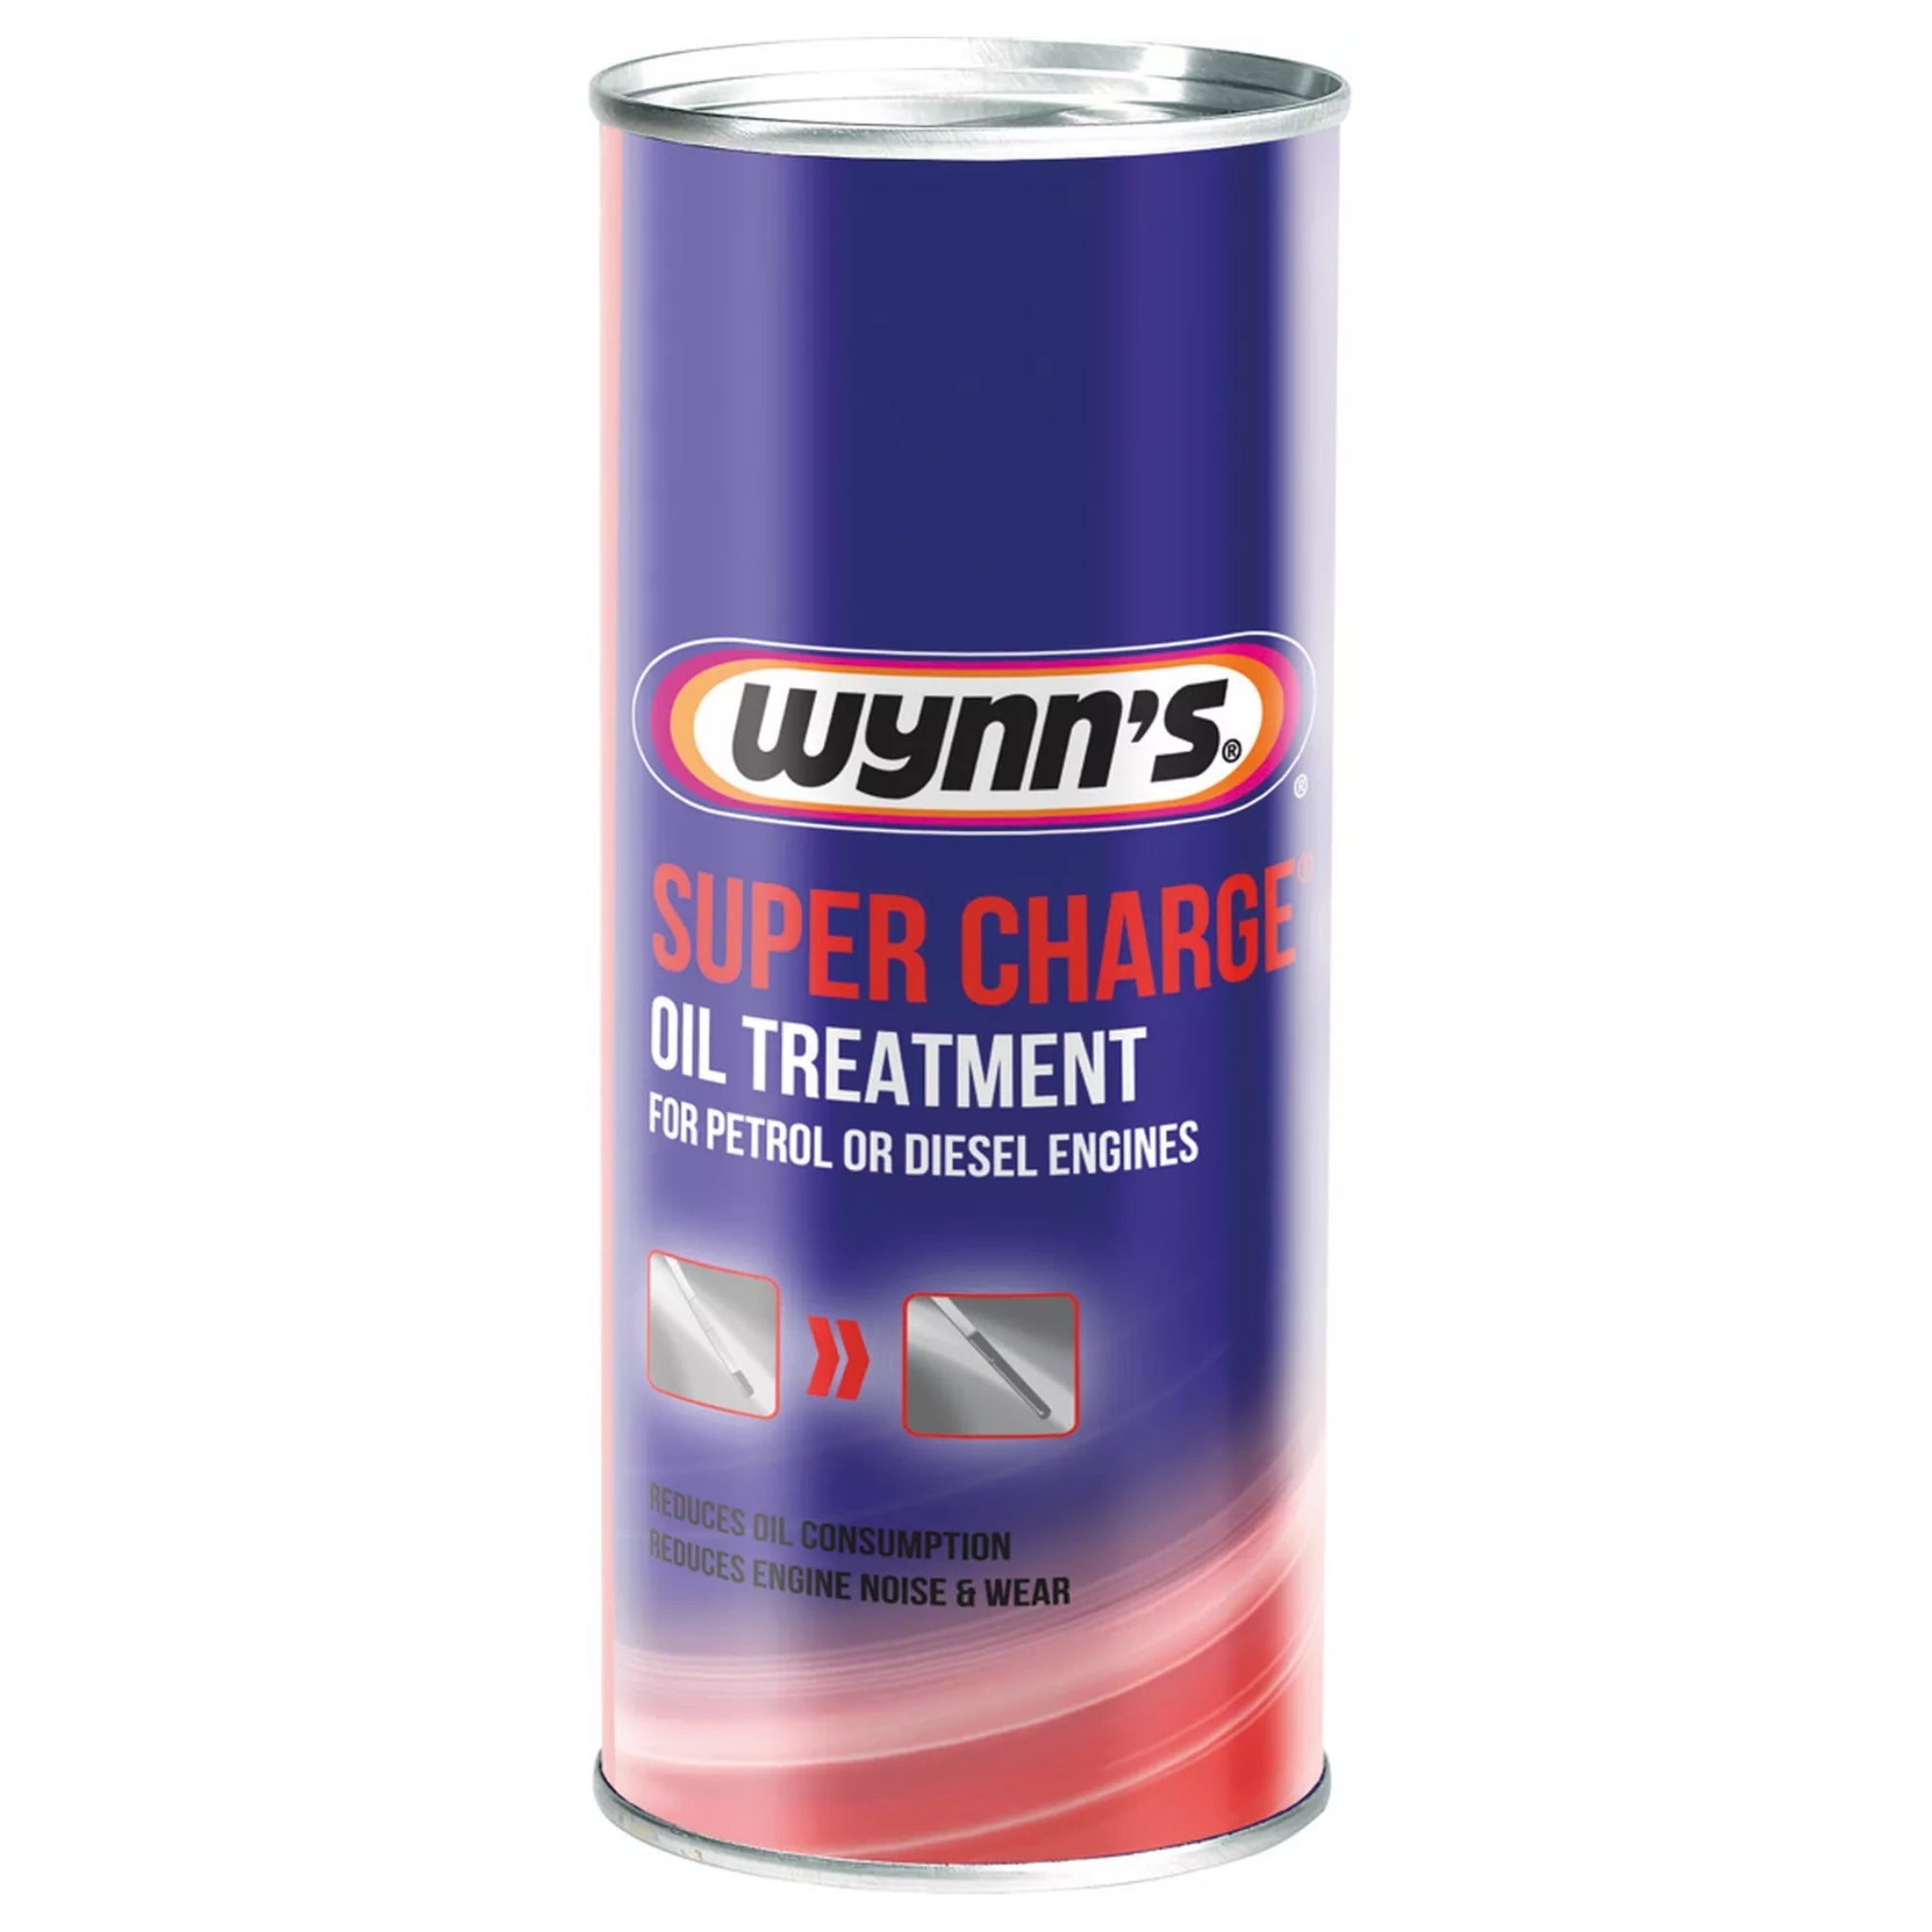 Wynn's Super Charge Oil Treatment For Petrol Or Diesel Engines 425ml